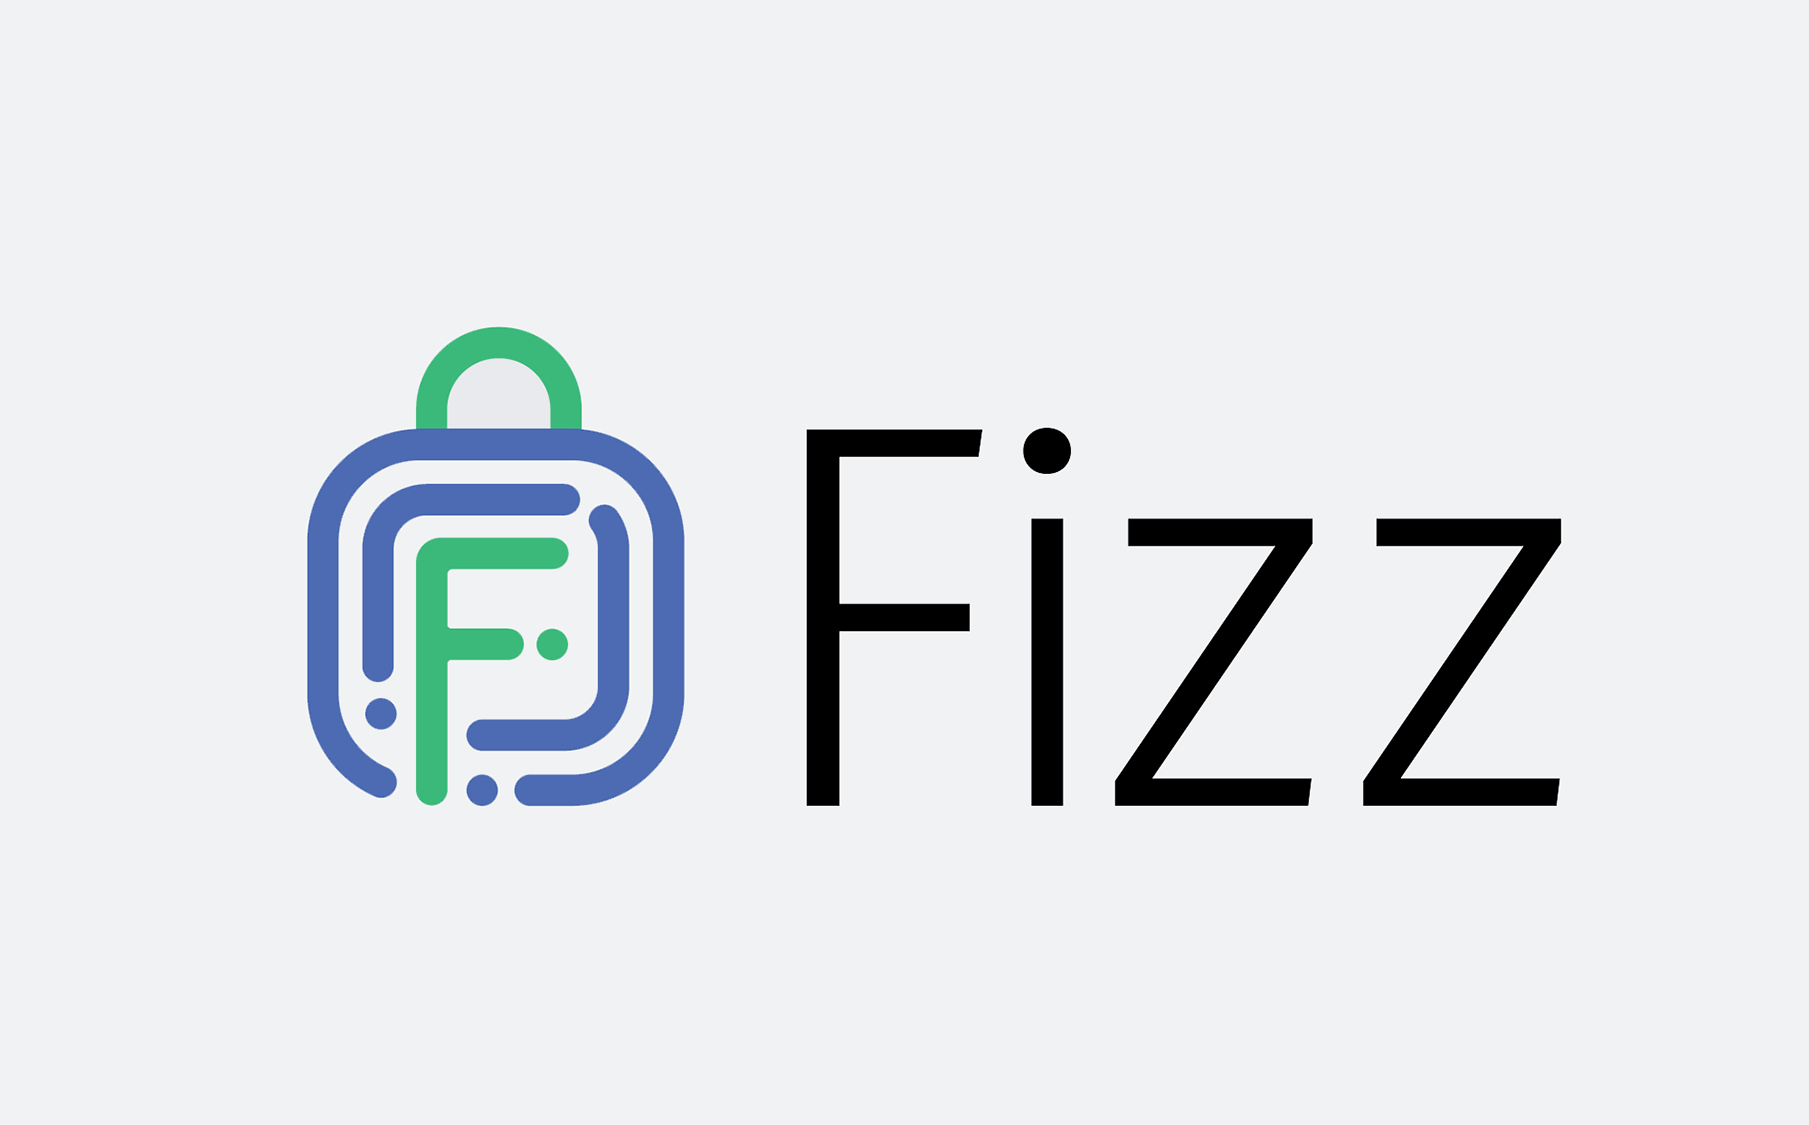 Deploying TLS 1.3 at scale with Fizz, a performant open source TLS library on Code.fb.com, Facebook's Engineering blog